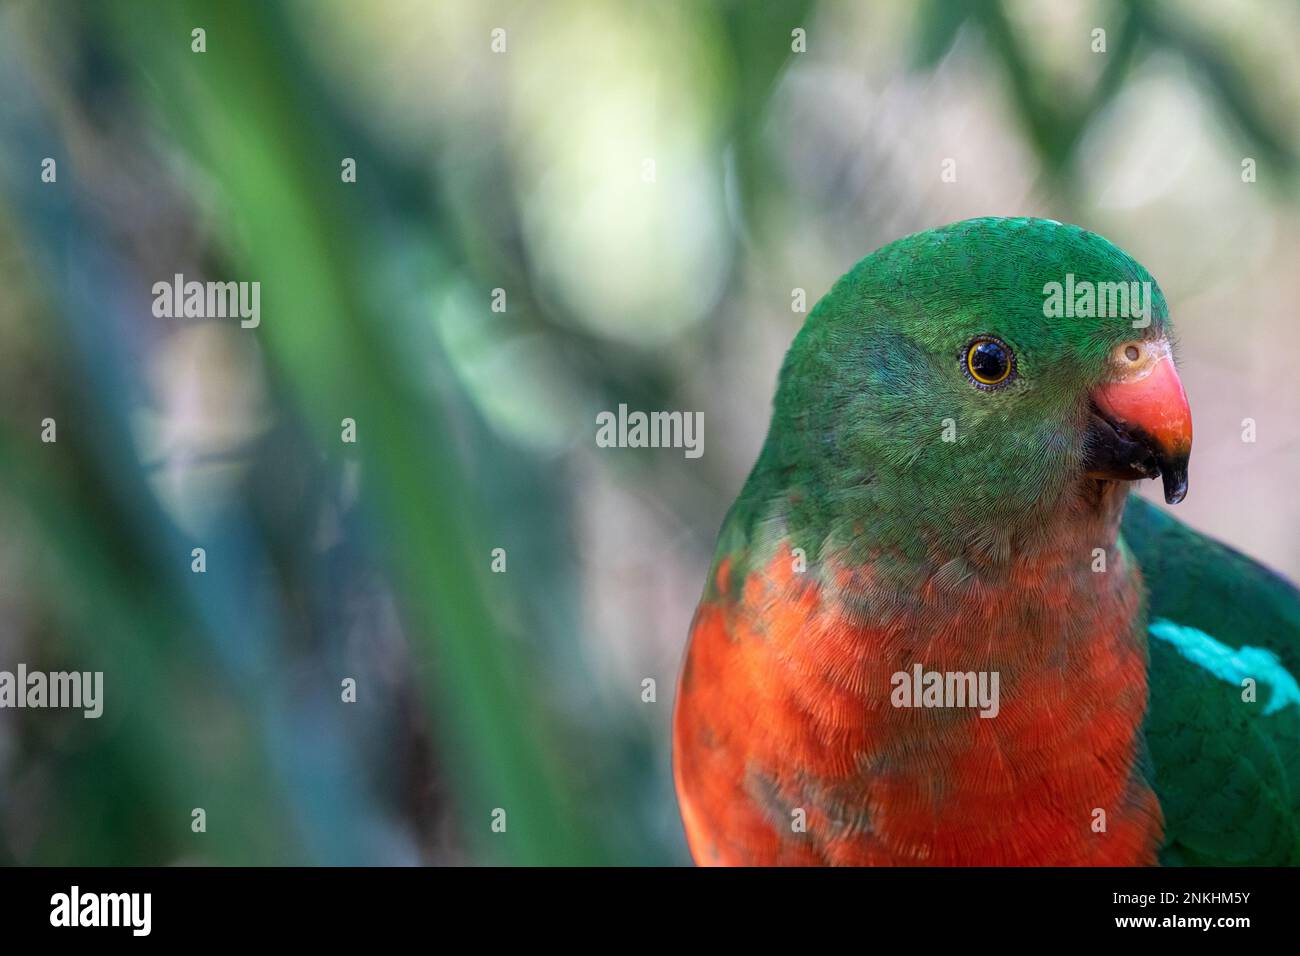 King parrot looking towards the right, with water drop on beak, close up, with copy space. Stock Photo